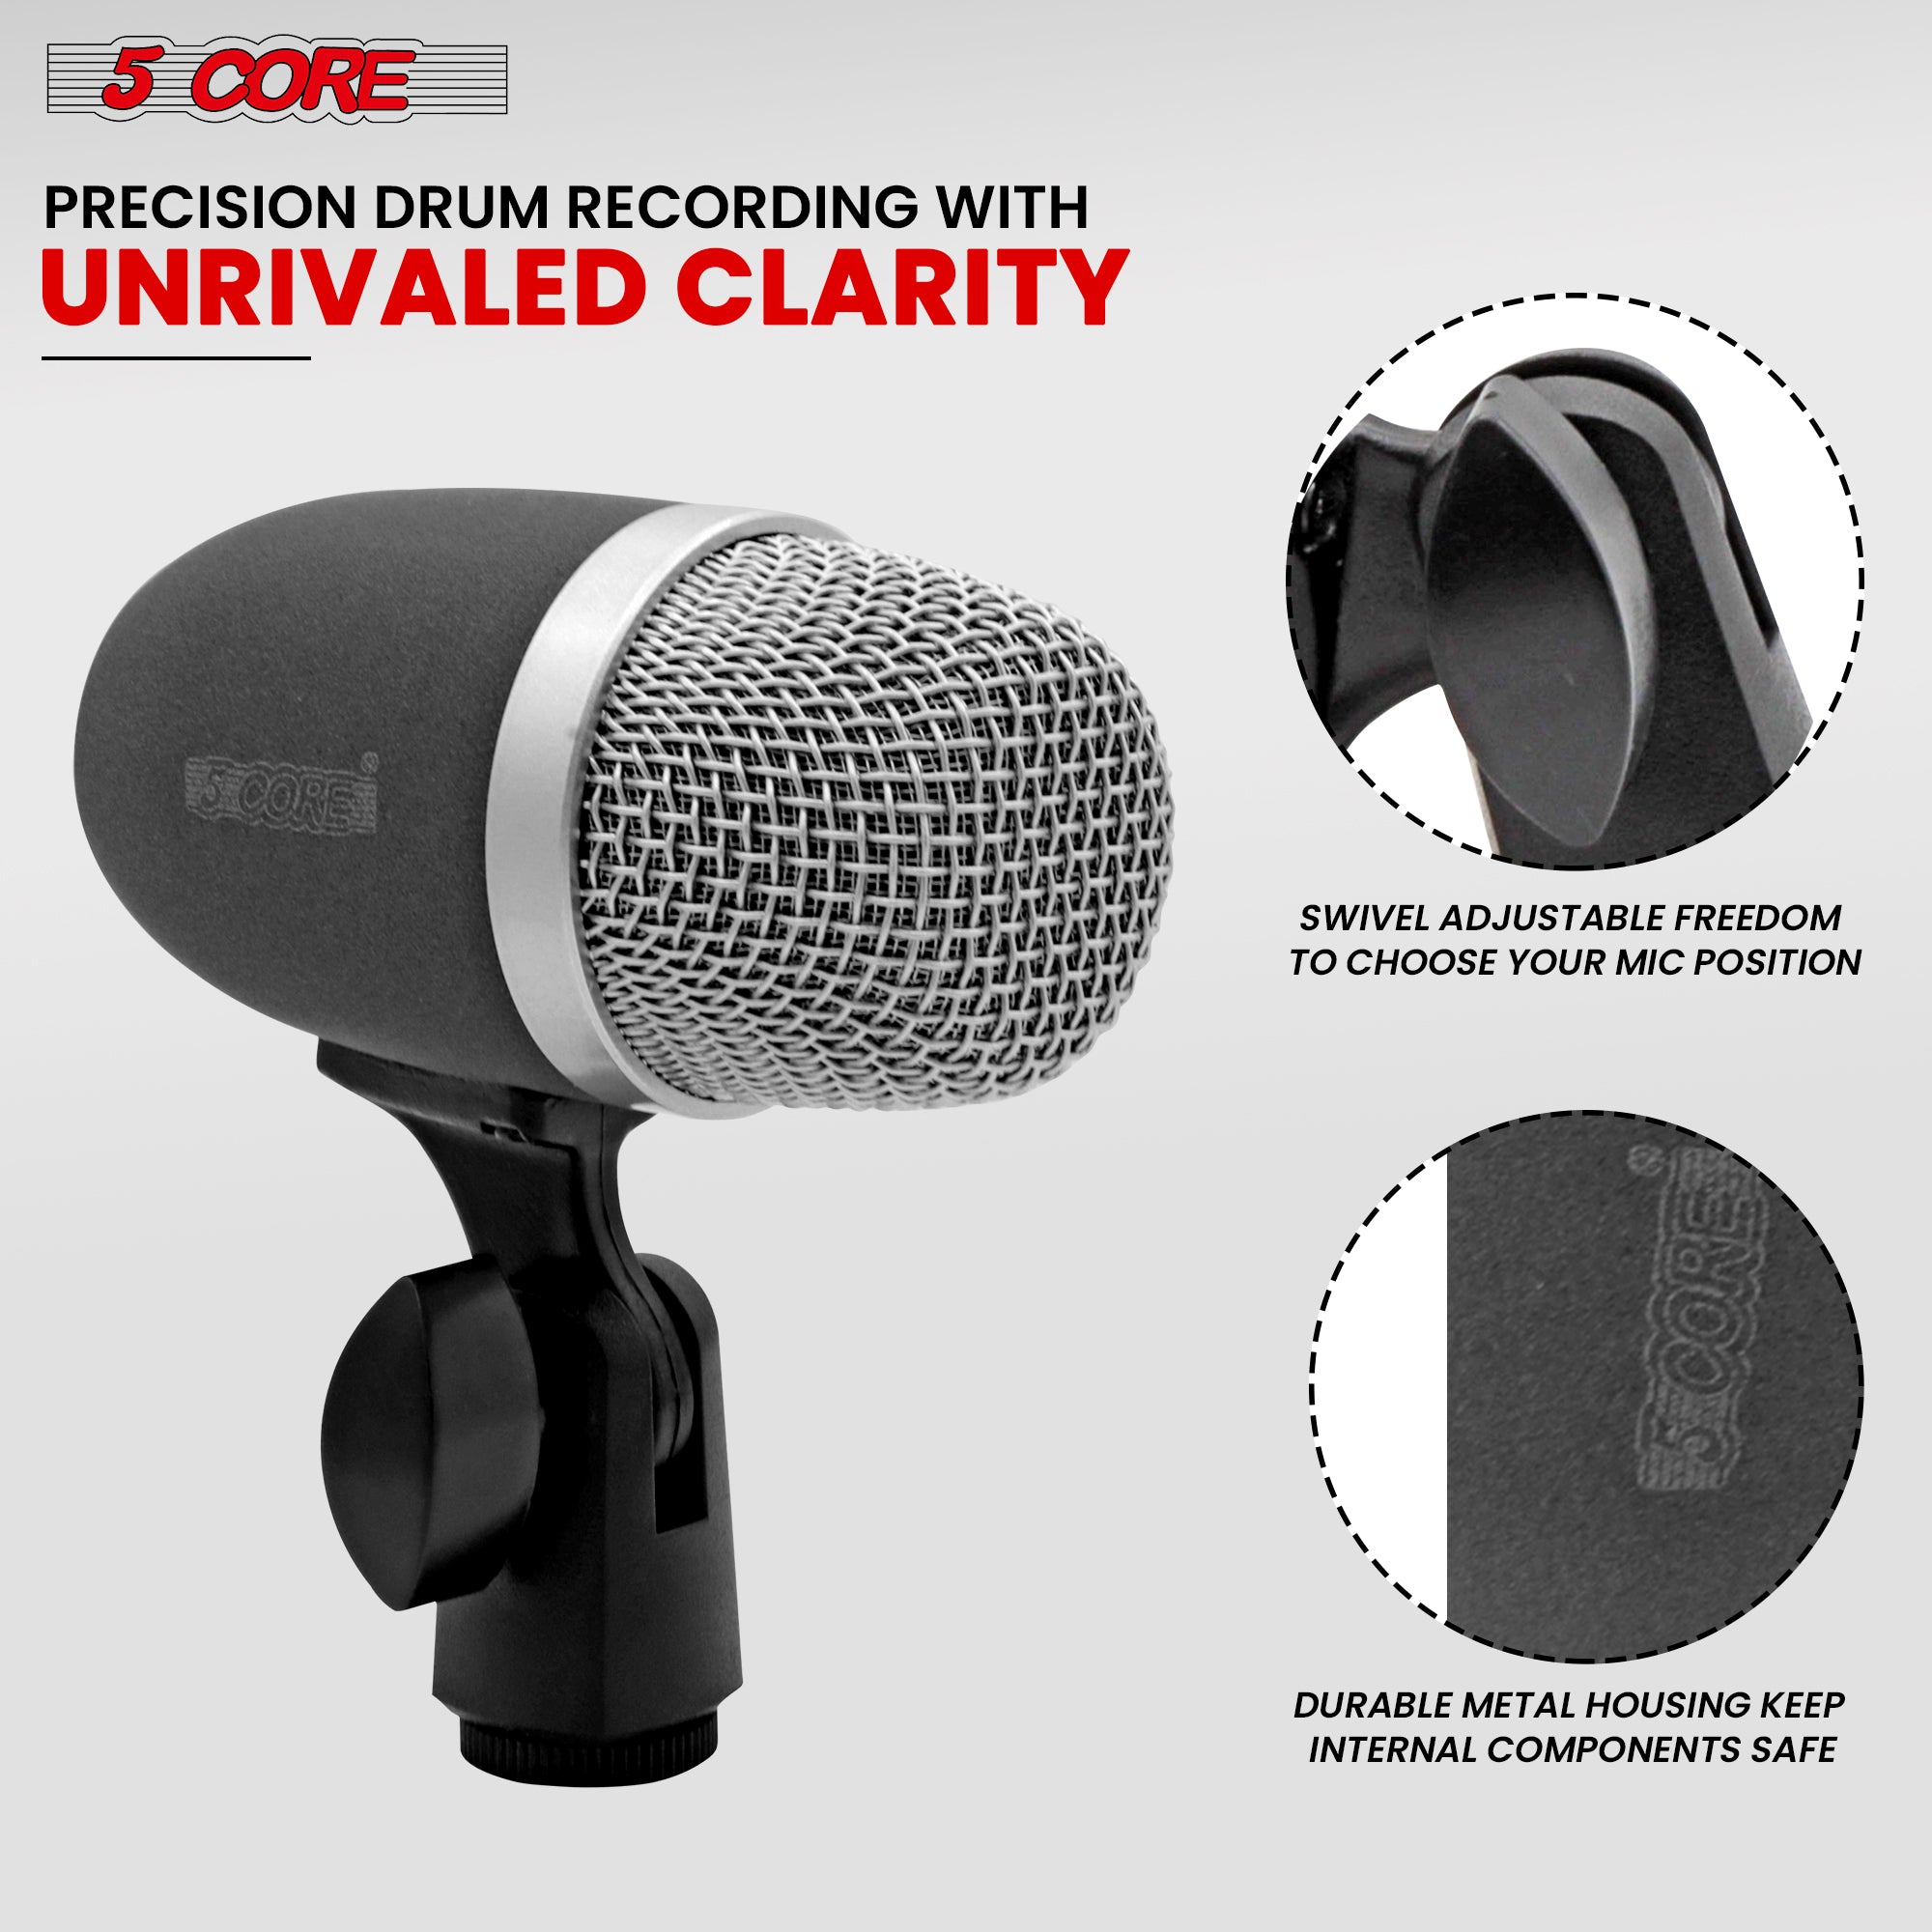 5 Core Conga Mic Set with Tom Snare Condenser Microphone Professional Cardioid Dynamic Instrument Mic Unidirectional Pickup for Close Miking - CONGO 3XP